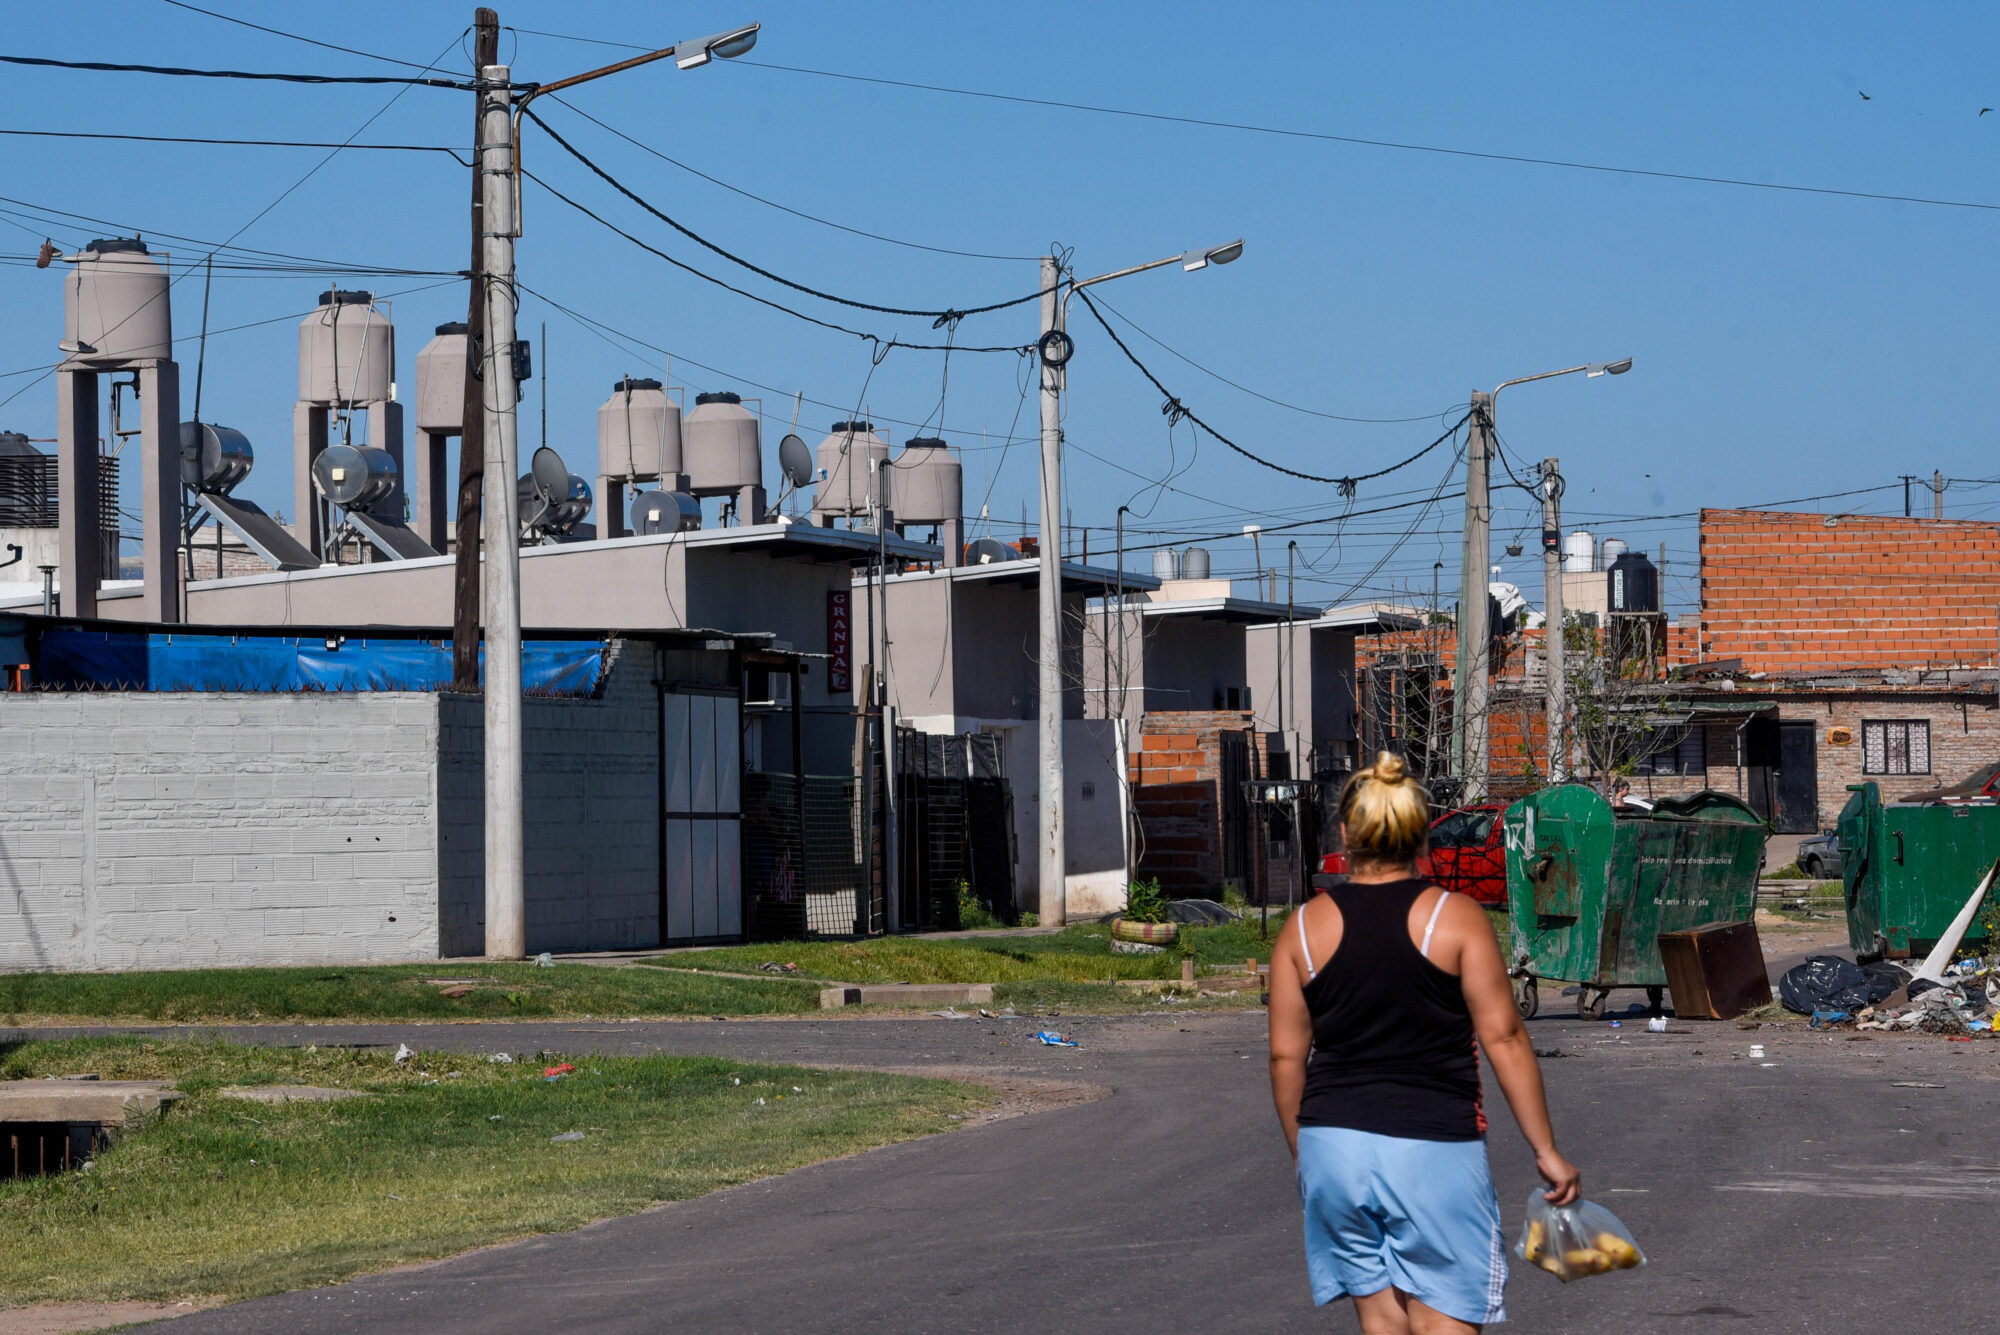 A woman walks in the Godoy neighbourhood of Rosario, Argentina. Rooftop solar collectors on a housing project can be seen in the background